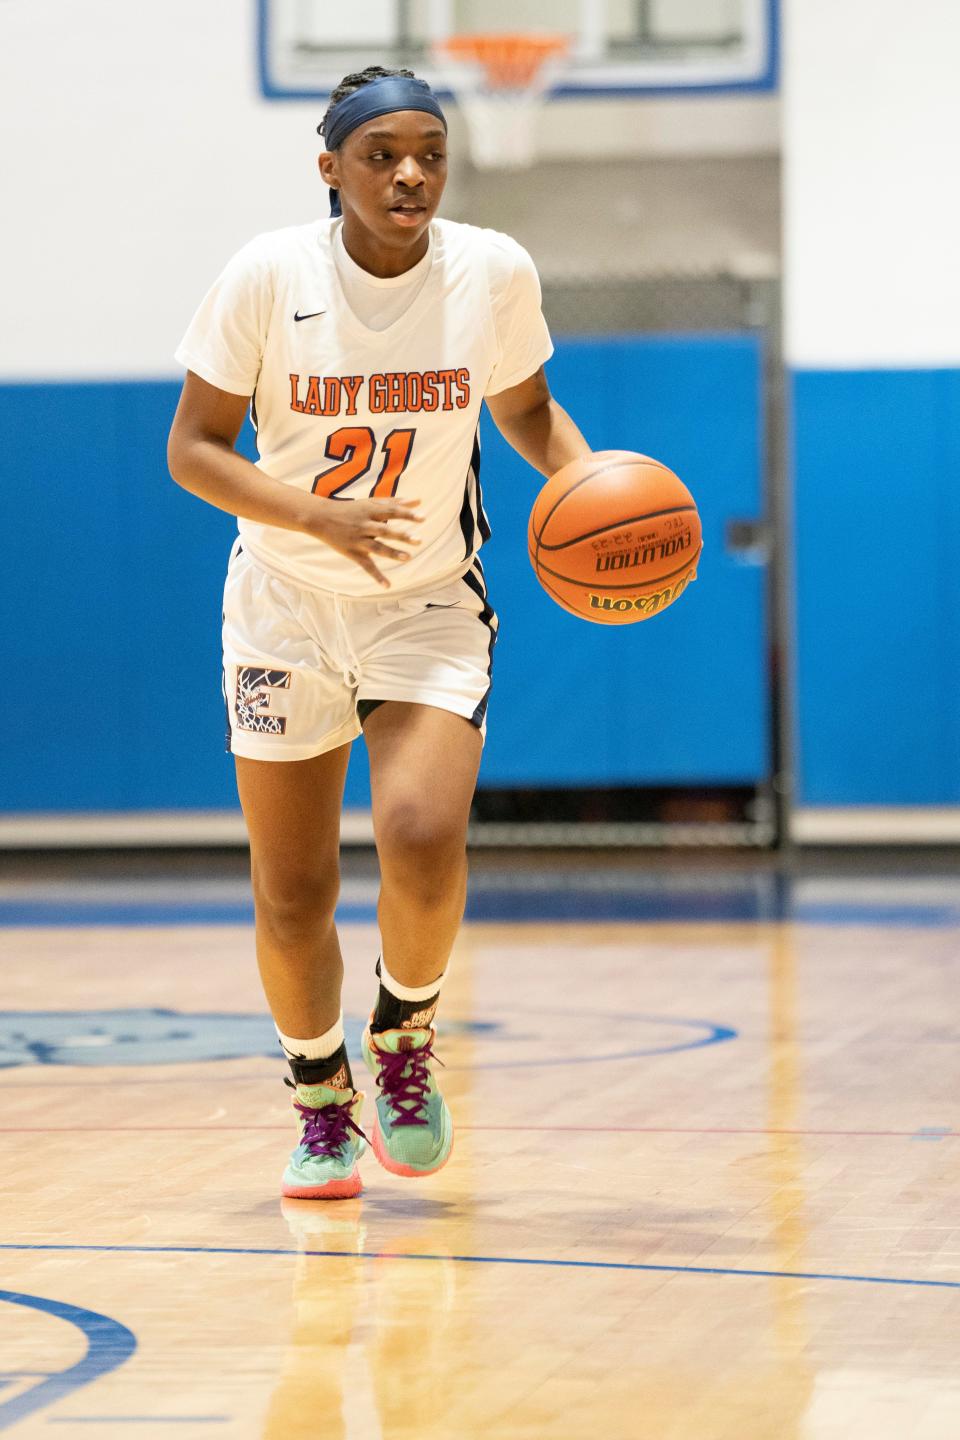 Wayne Valley vs. Eastside in the Passaic County Girls Basketball semifinals at Passaic County Technical Institute in Wayne on Thursday, February 16, 2023. E #21 Jhy'Deisha Stewart.